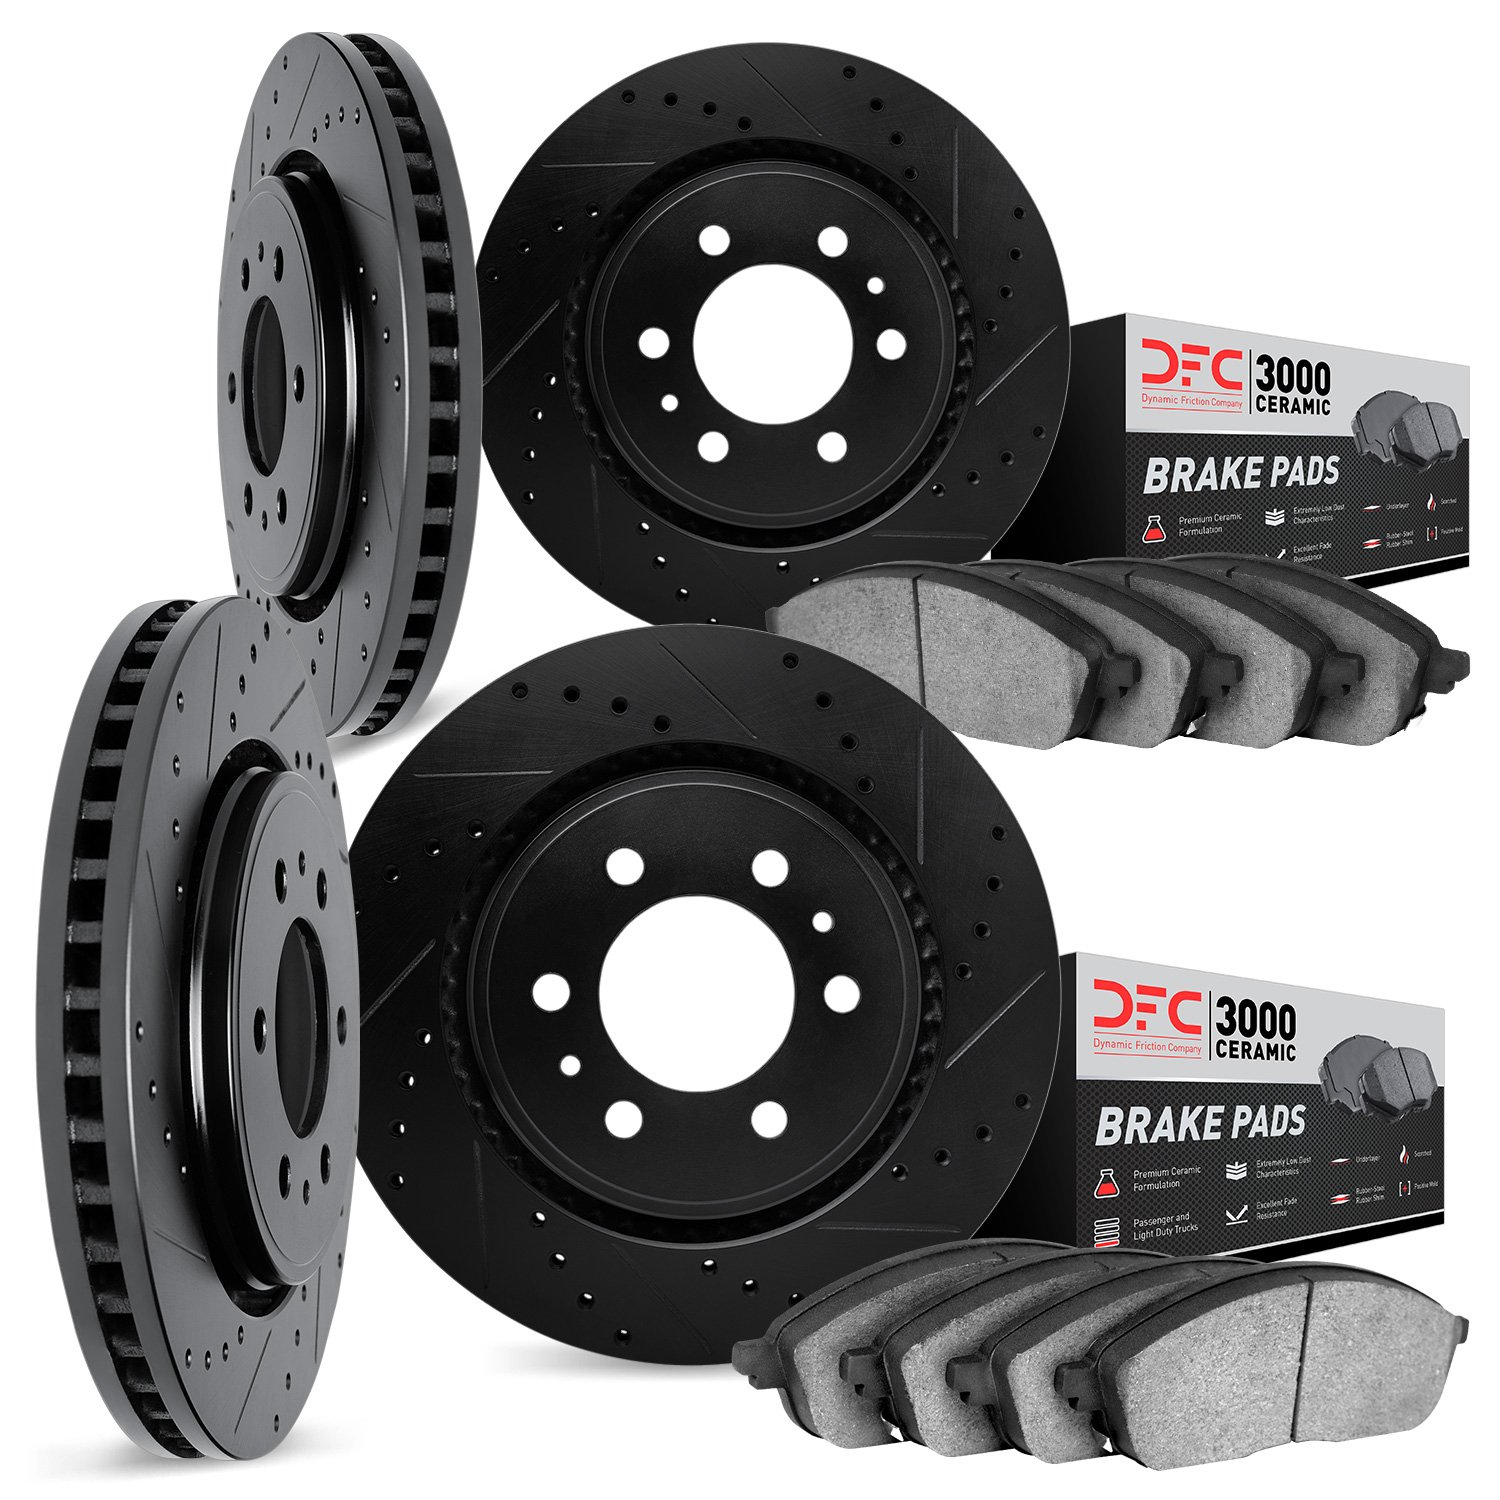 8304-67072 Drilled/Slotted Brake Rotors with 3000-Series Ceramic Brake Pads Kit [Black], Fits Select Infiniti/Nissan, Position: